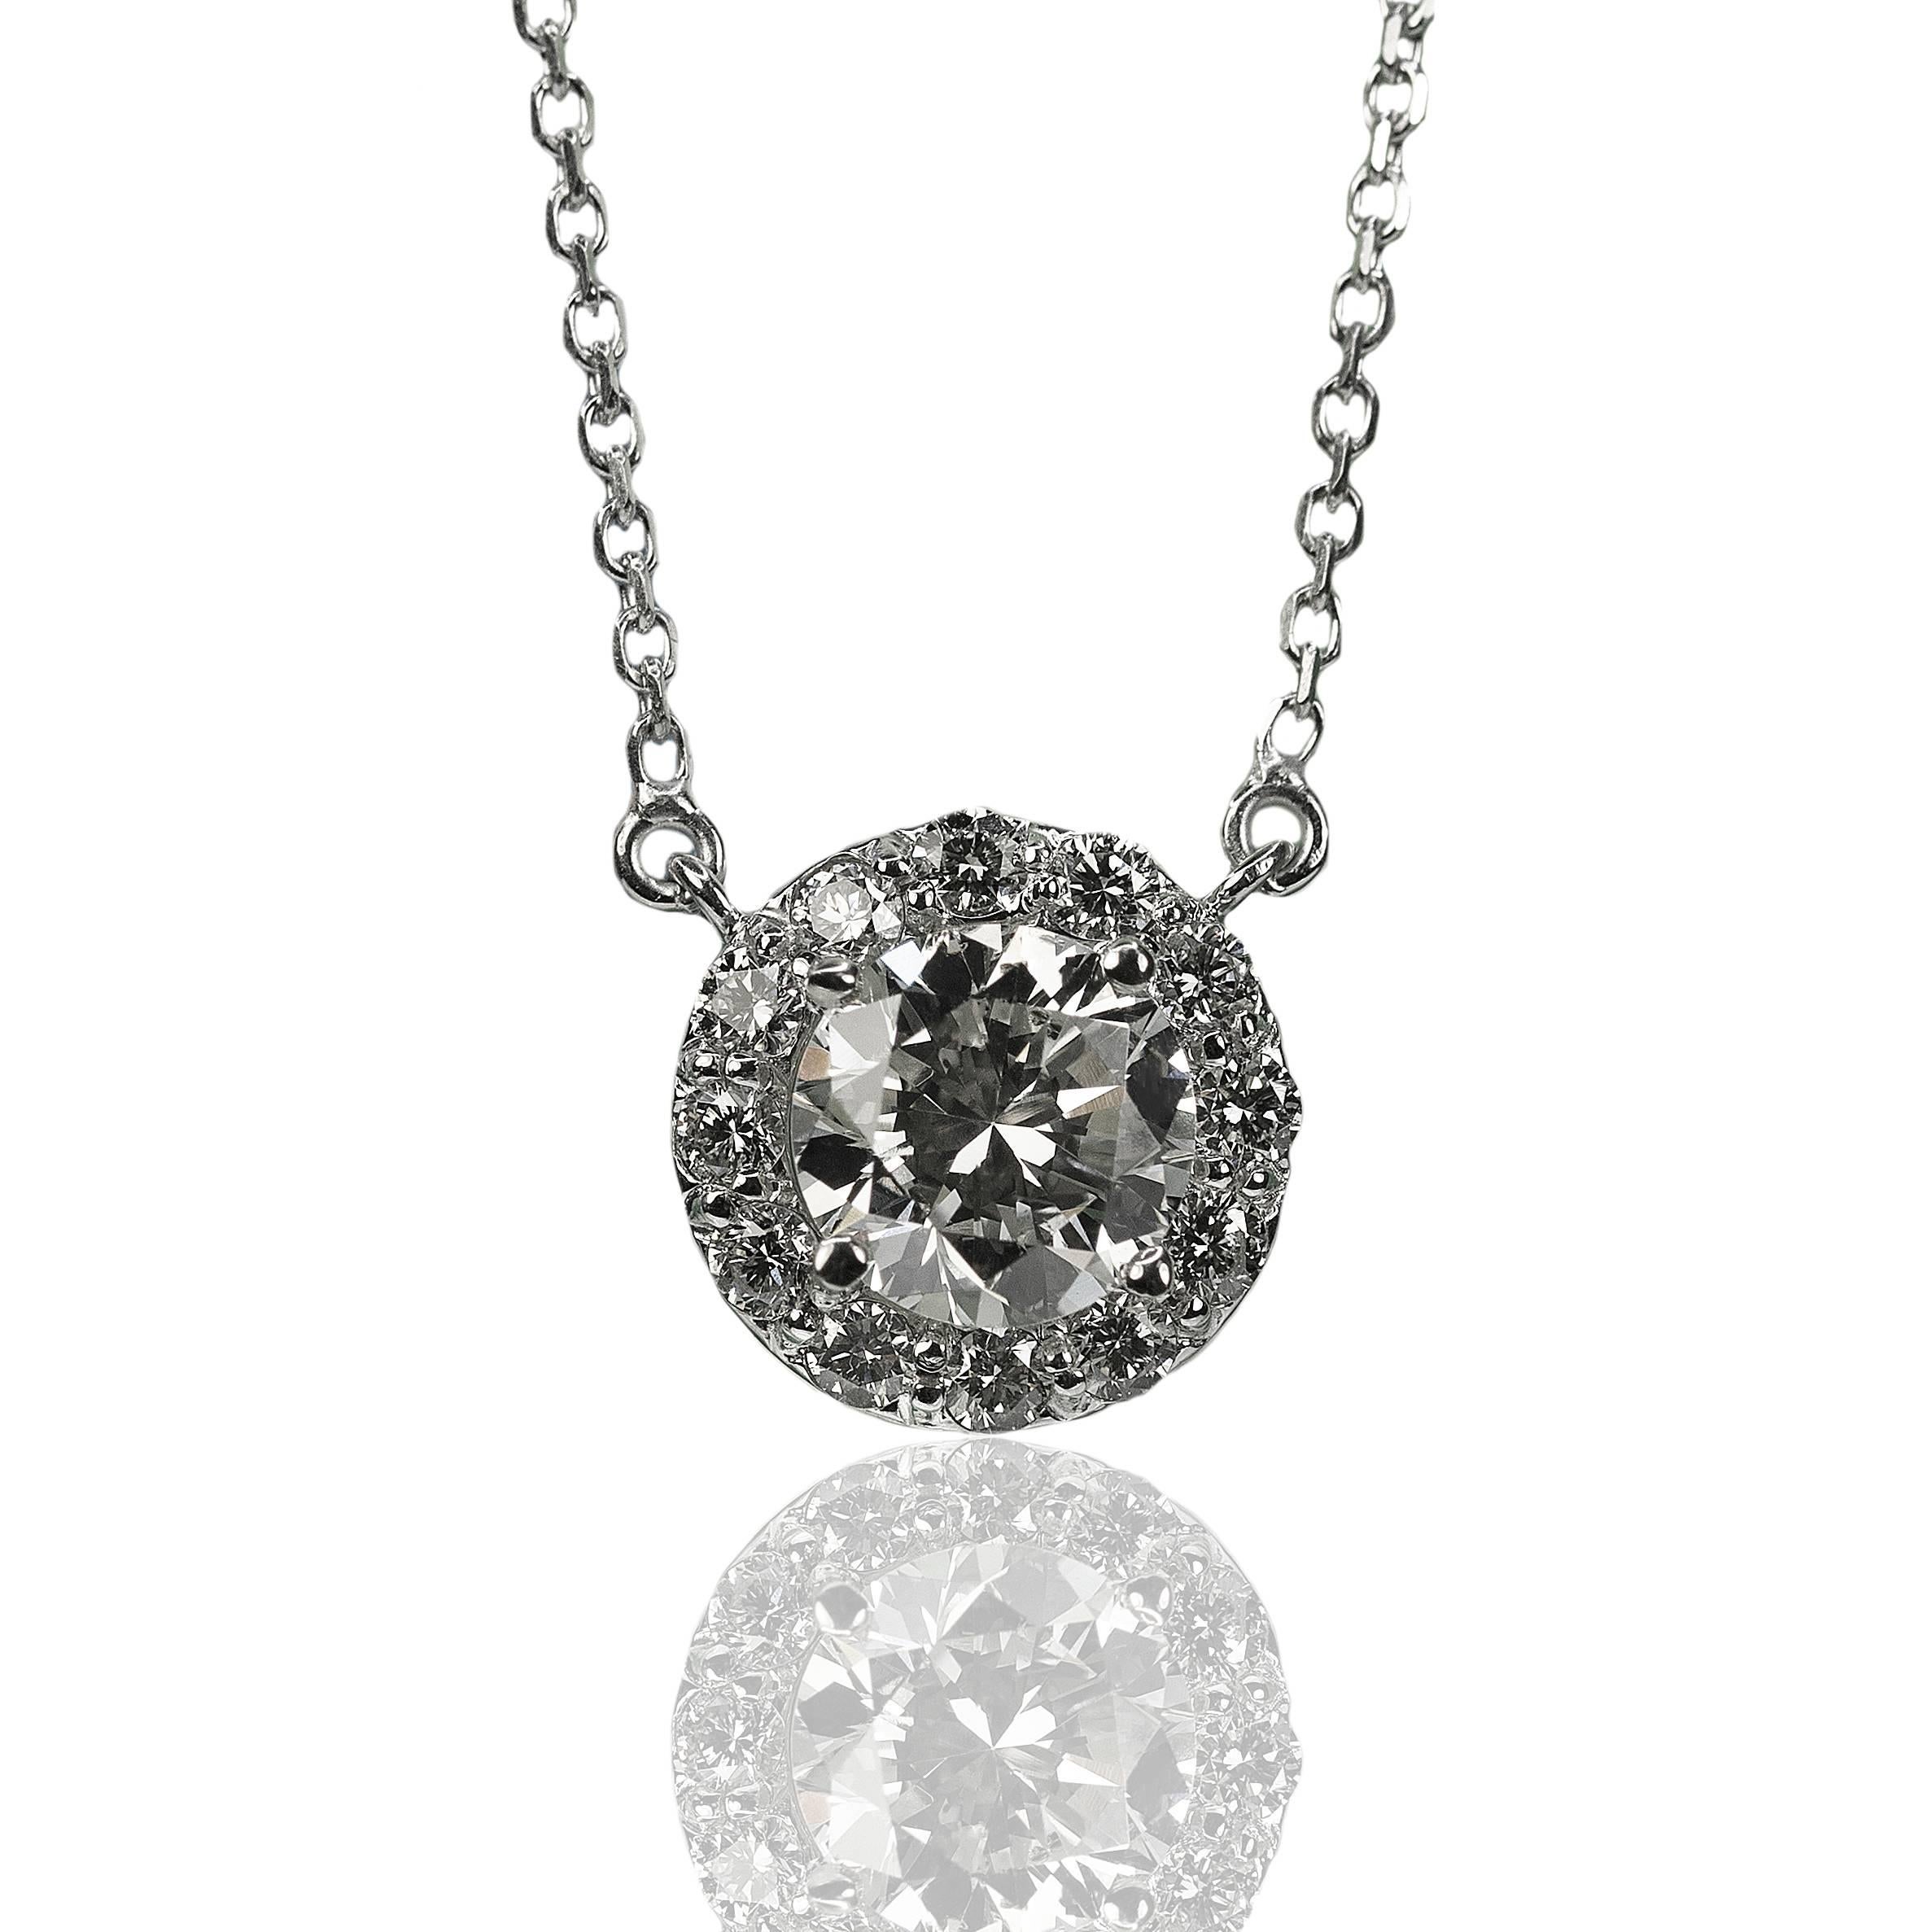 14k White Gold Necklace with one 1.07ct round brilliant surrounded by twelve smaller round brilliant diamonds weighing 0.31ct, 16